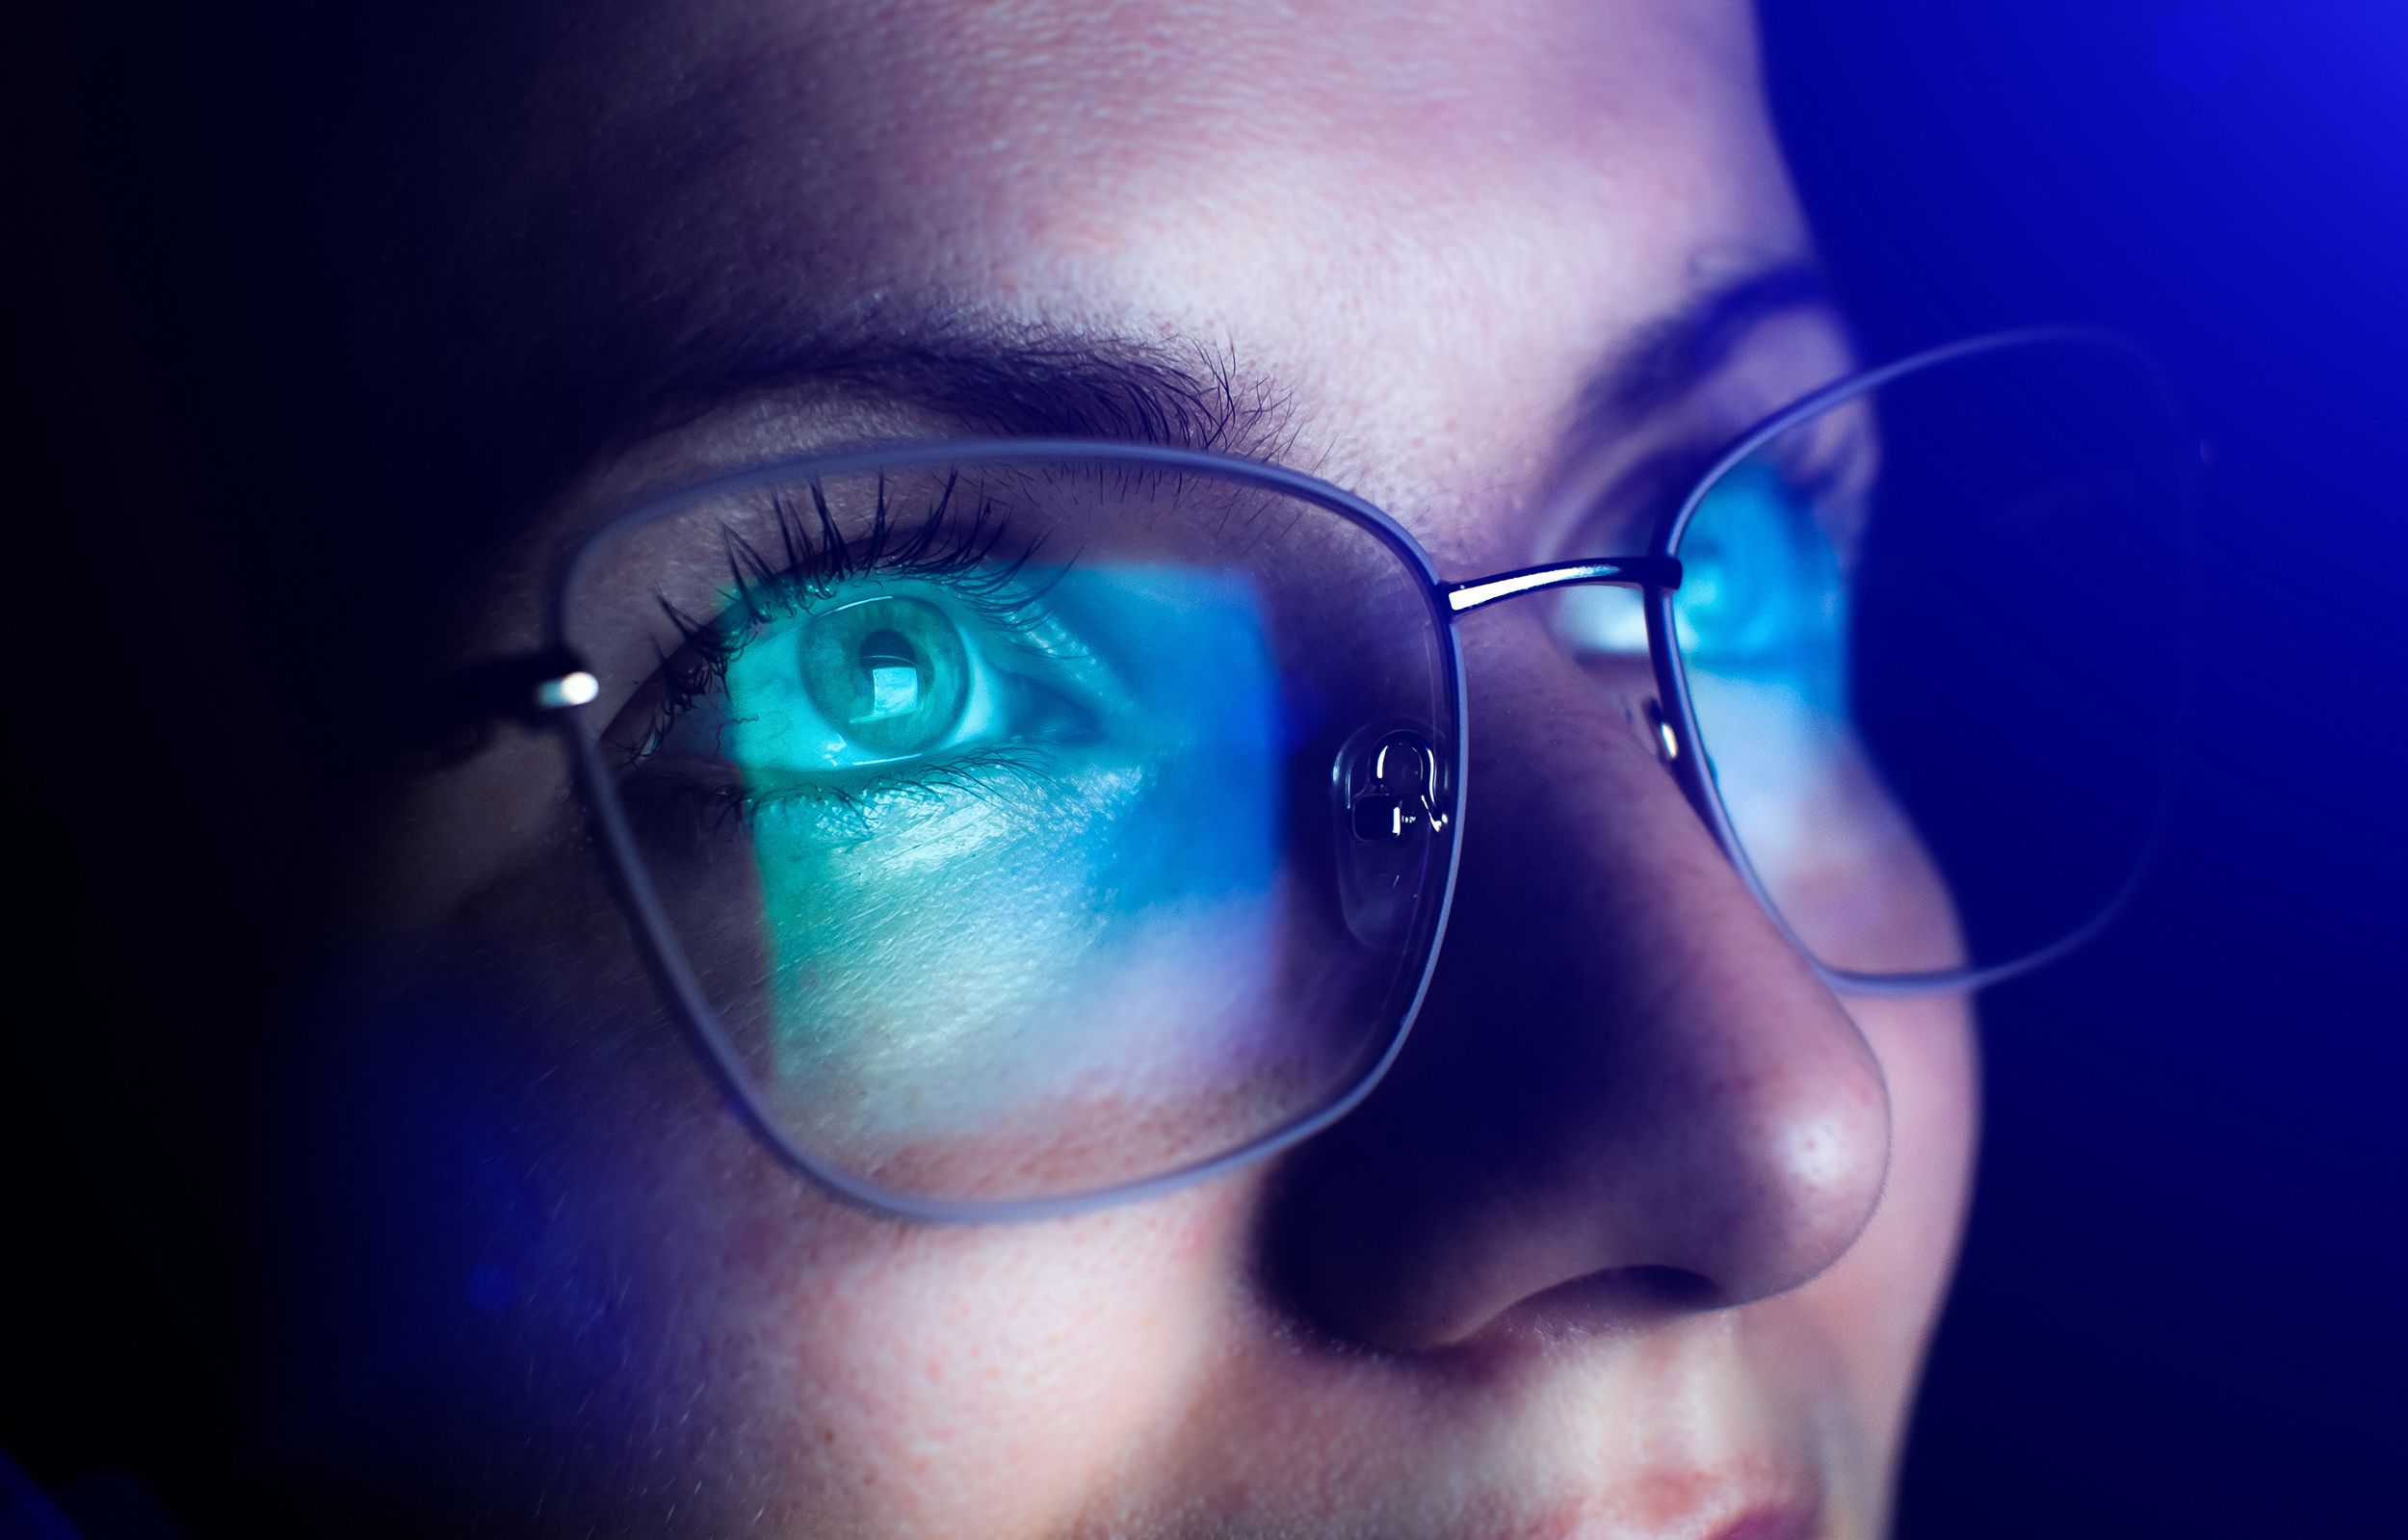 The blue light glasses benefits you should know